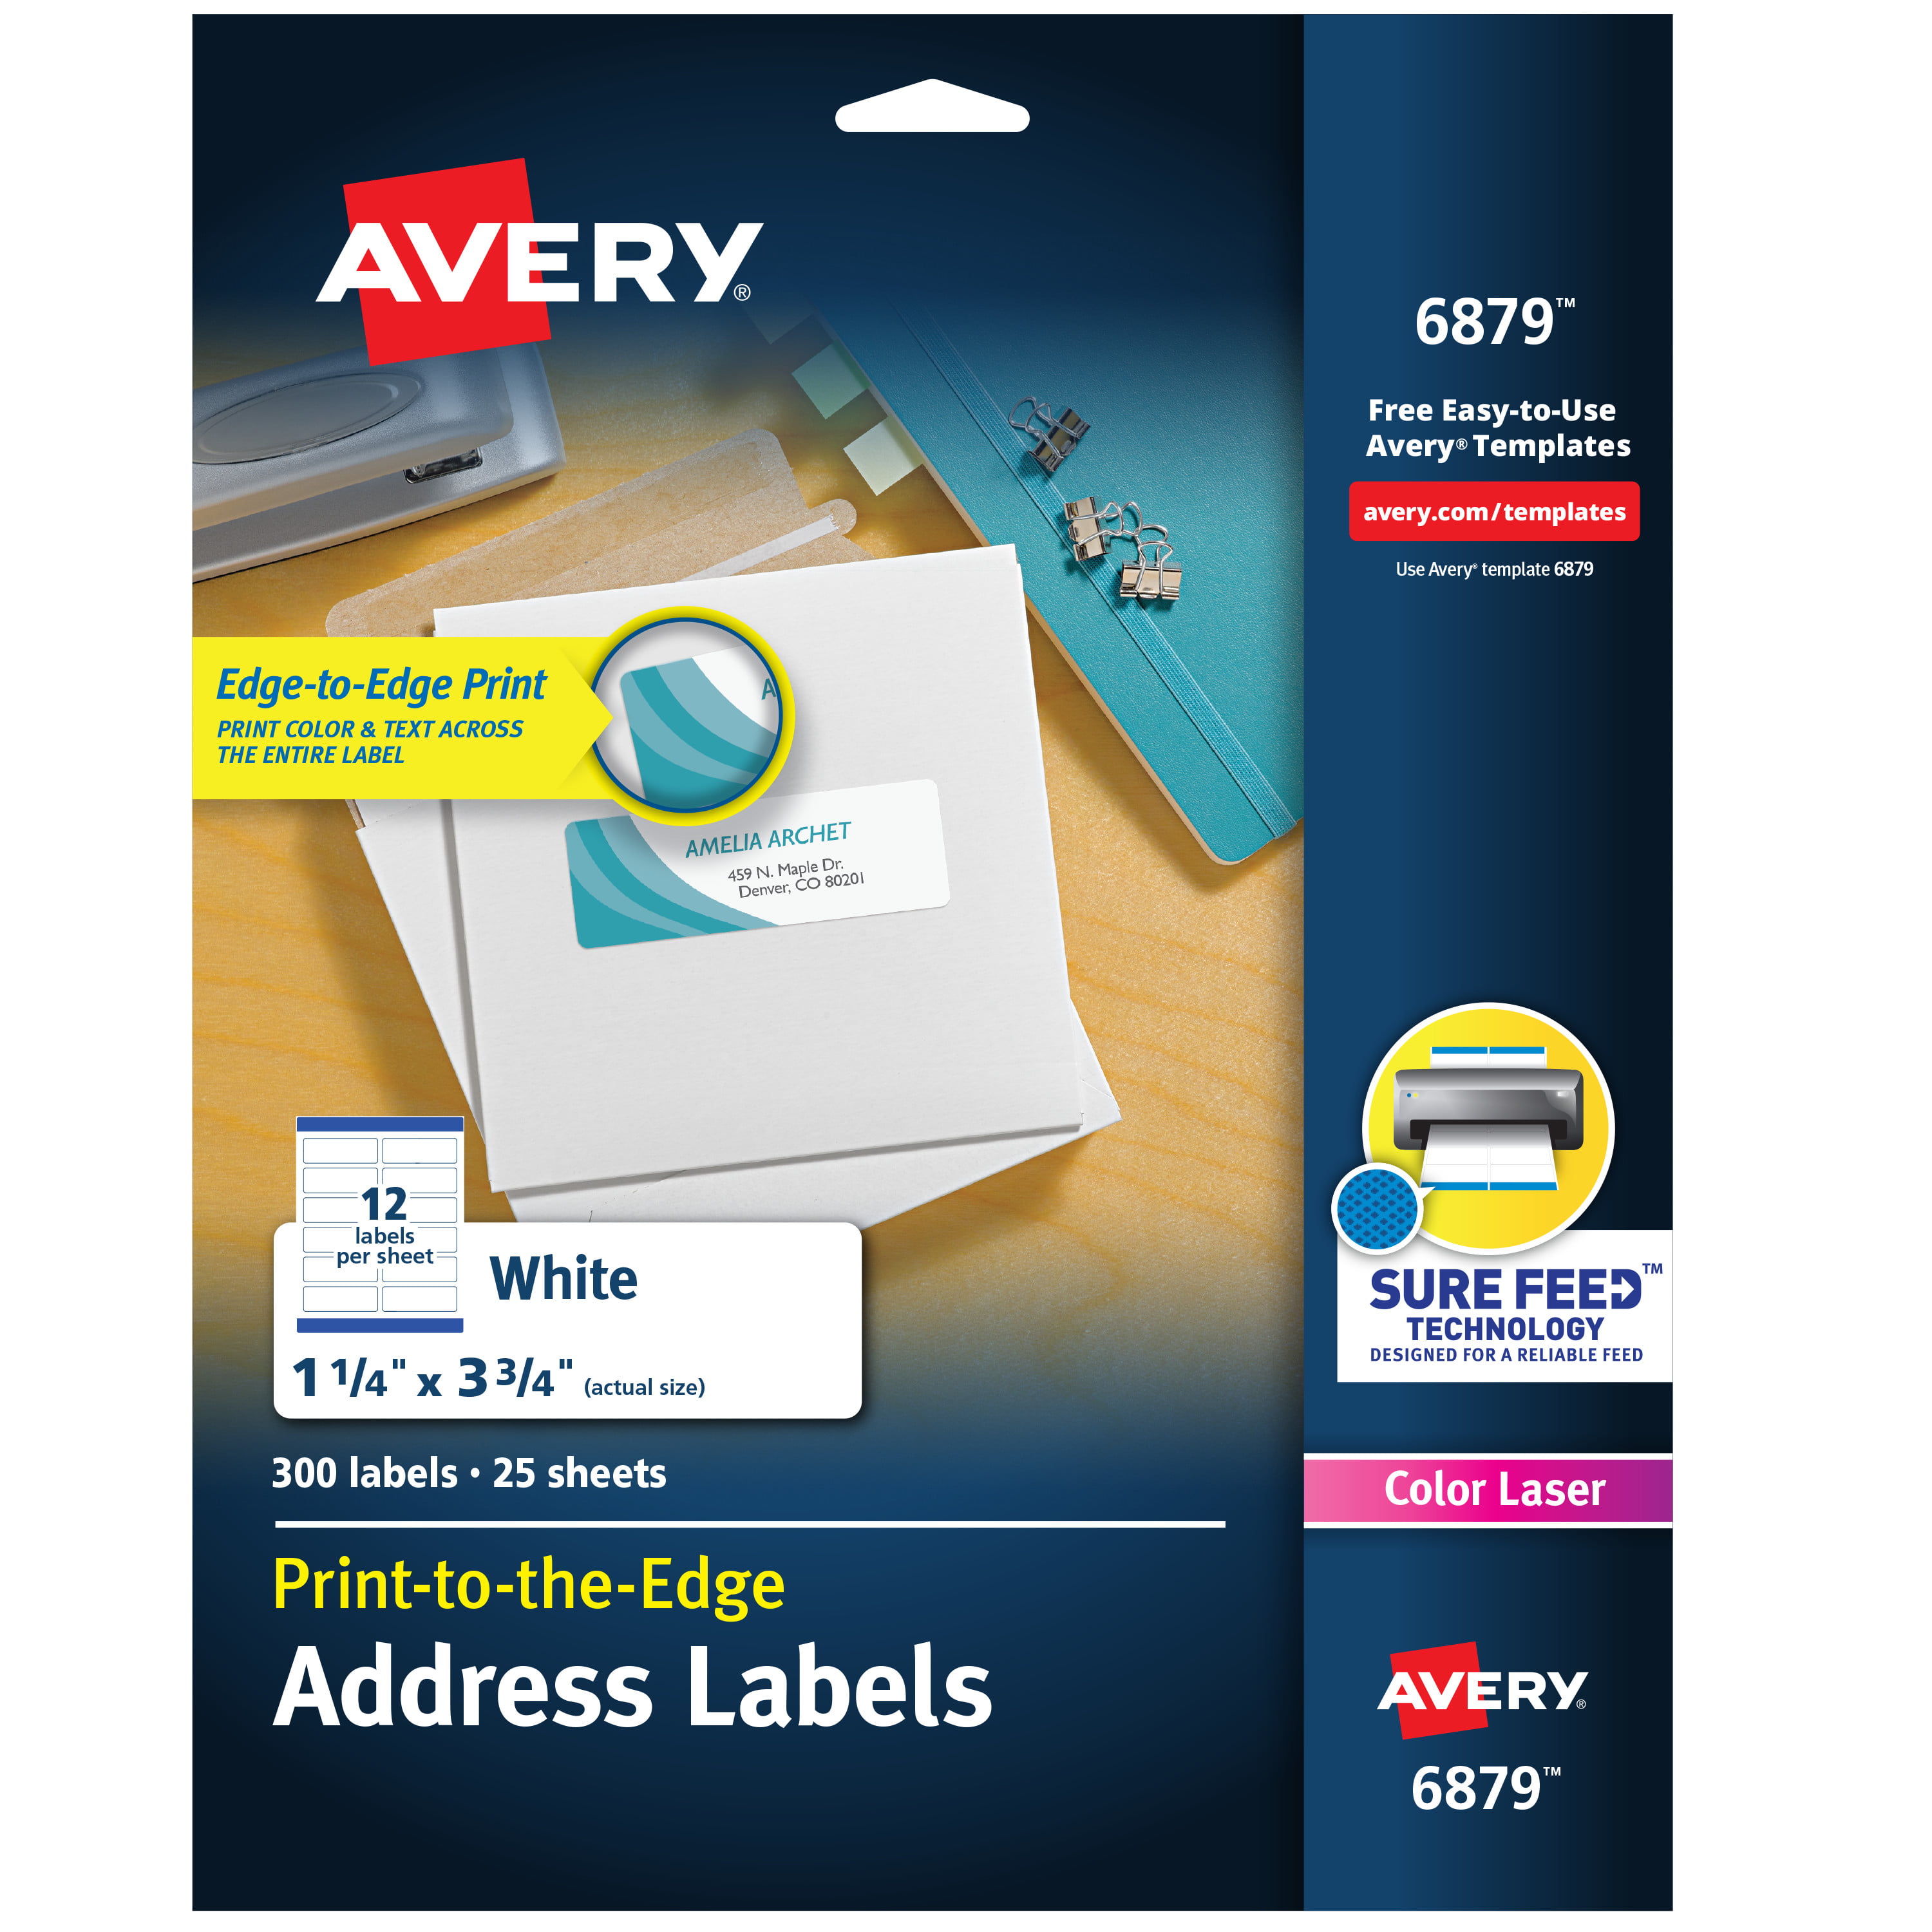 avery-print-to-the-edge-shipping-label-1-1-4-x3-3-4-300-labels-6879-walmart-walmart